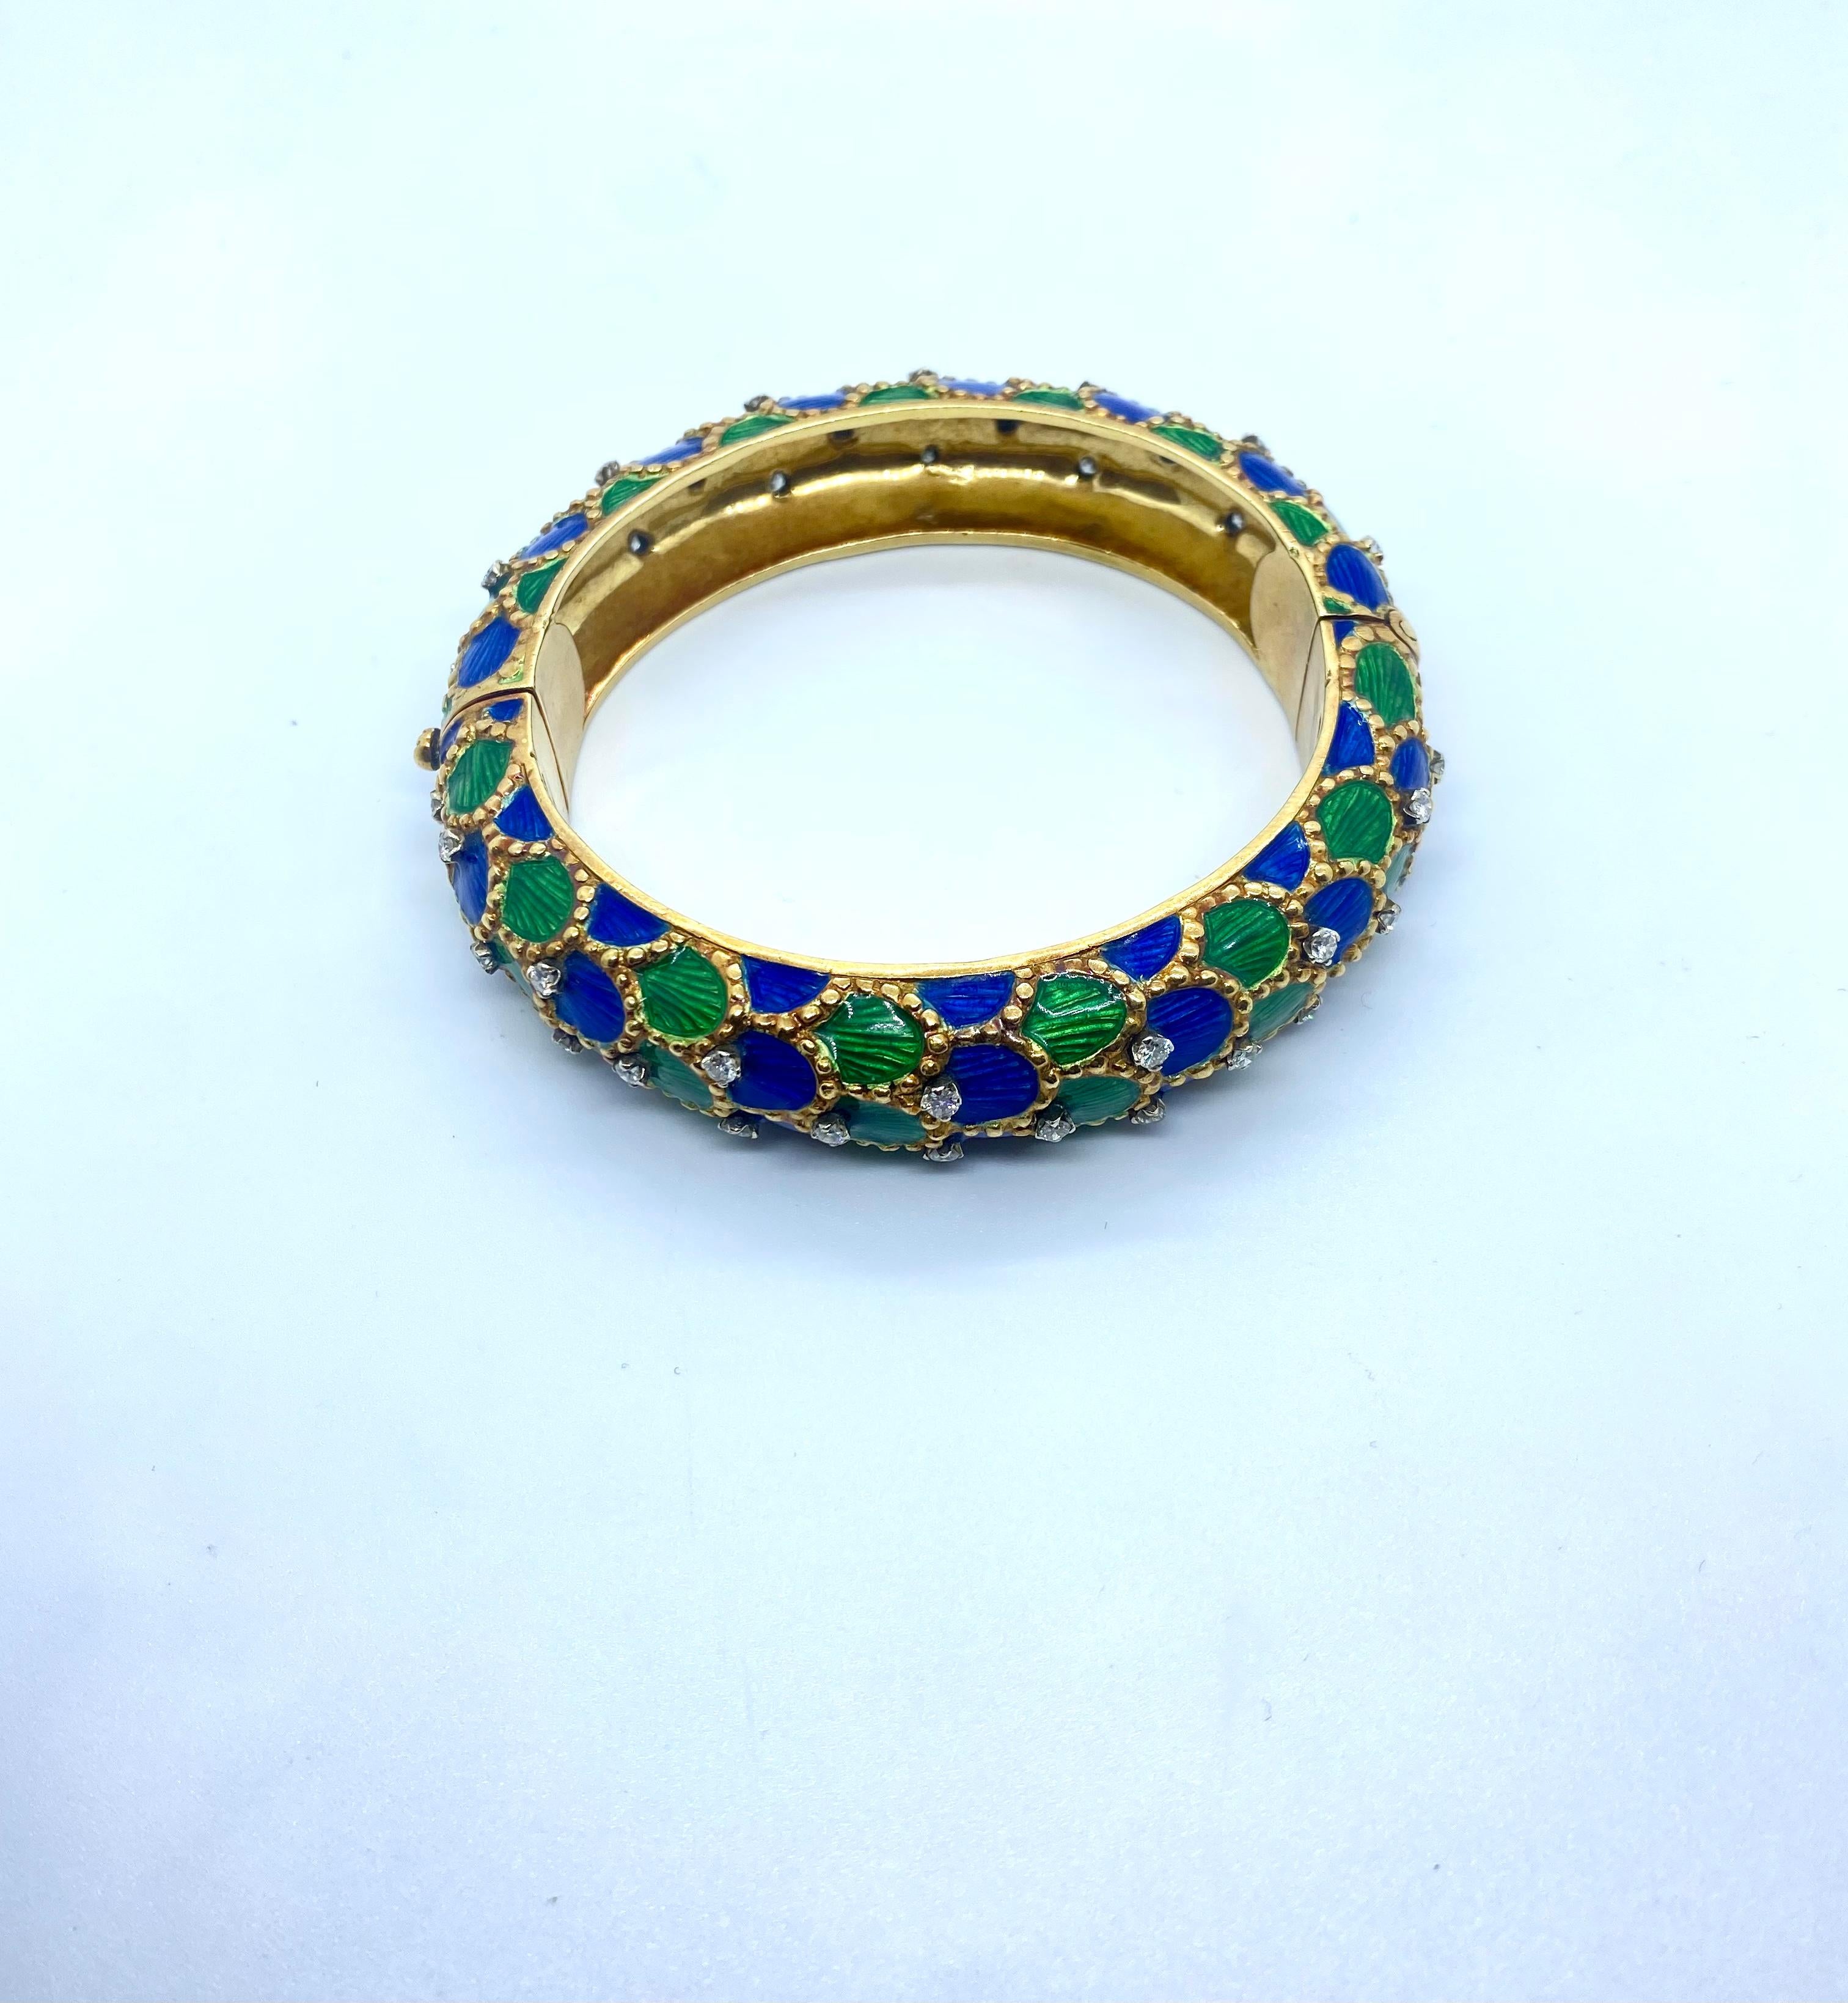 18K Yellow Gold Blue and Green Enamel Fishnet Bangle Bracelet . The inside diameter is 2 1/8 inches high and 2 3/8 inches wide. The bangle weighs 103 grams diamond 0,50ct
